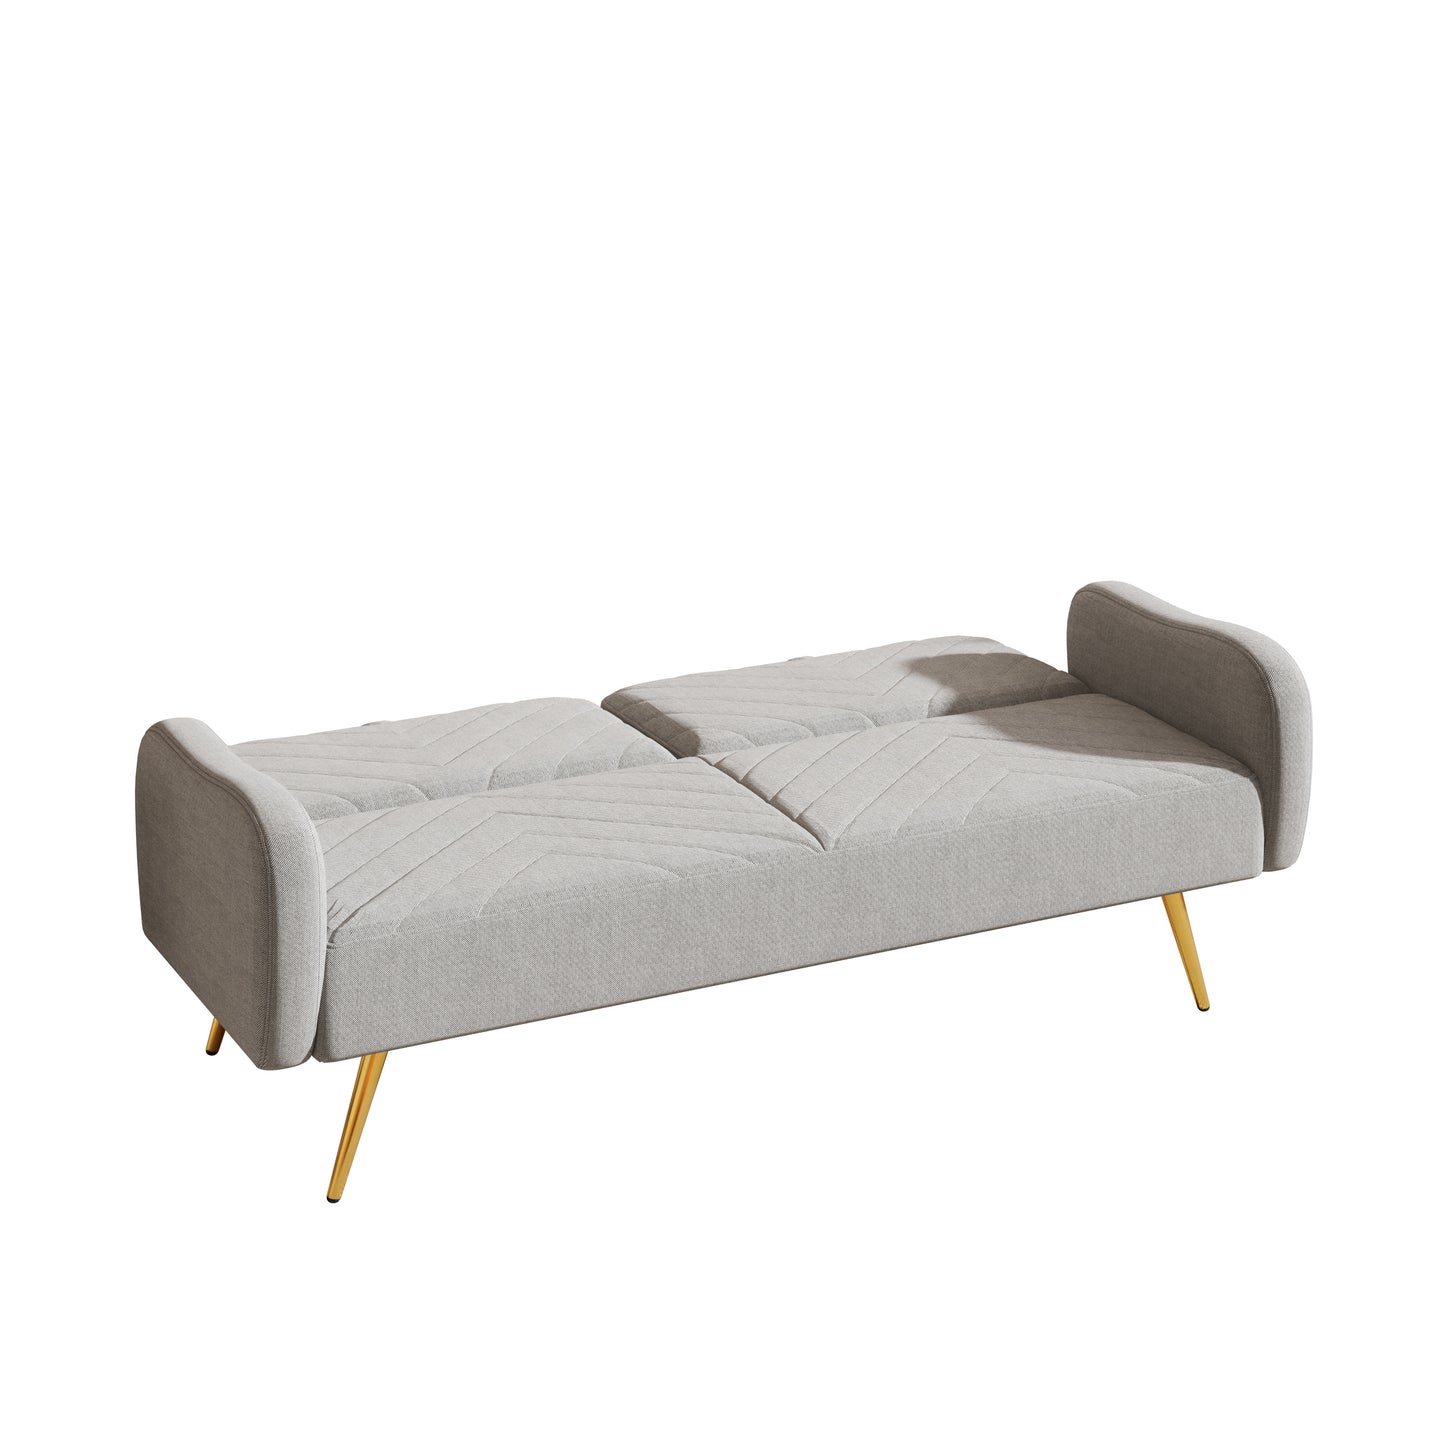 70.47" Gray Fabric Double Sofa with Split Backrest and Two Throw Pillows